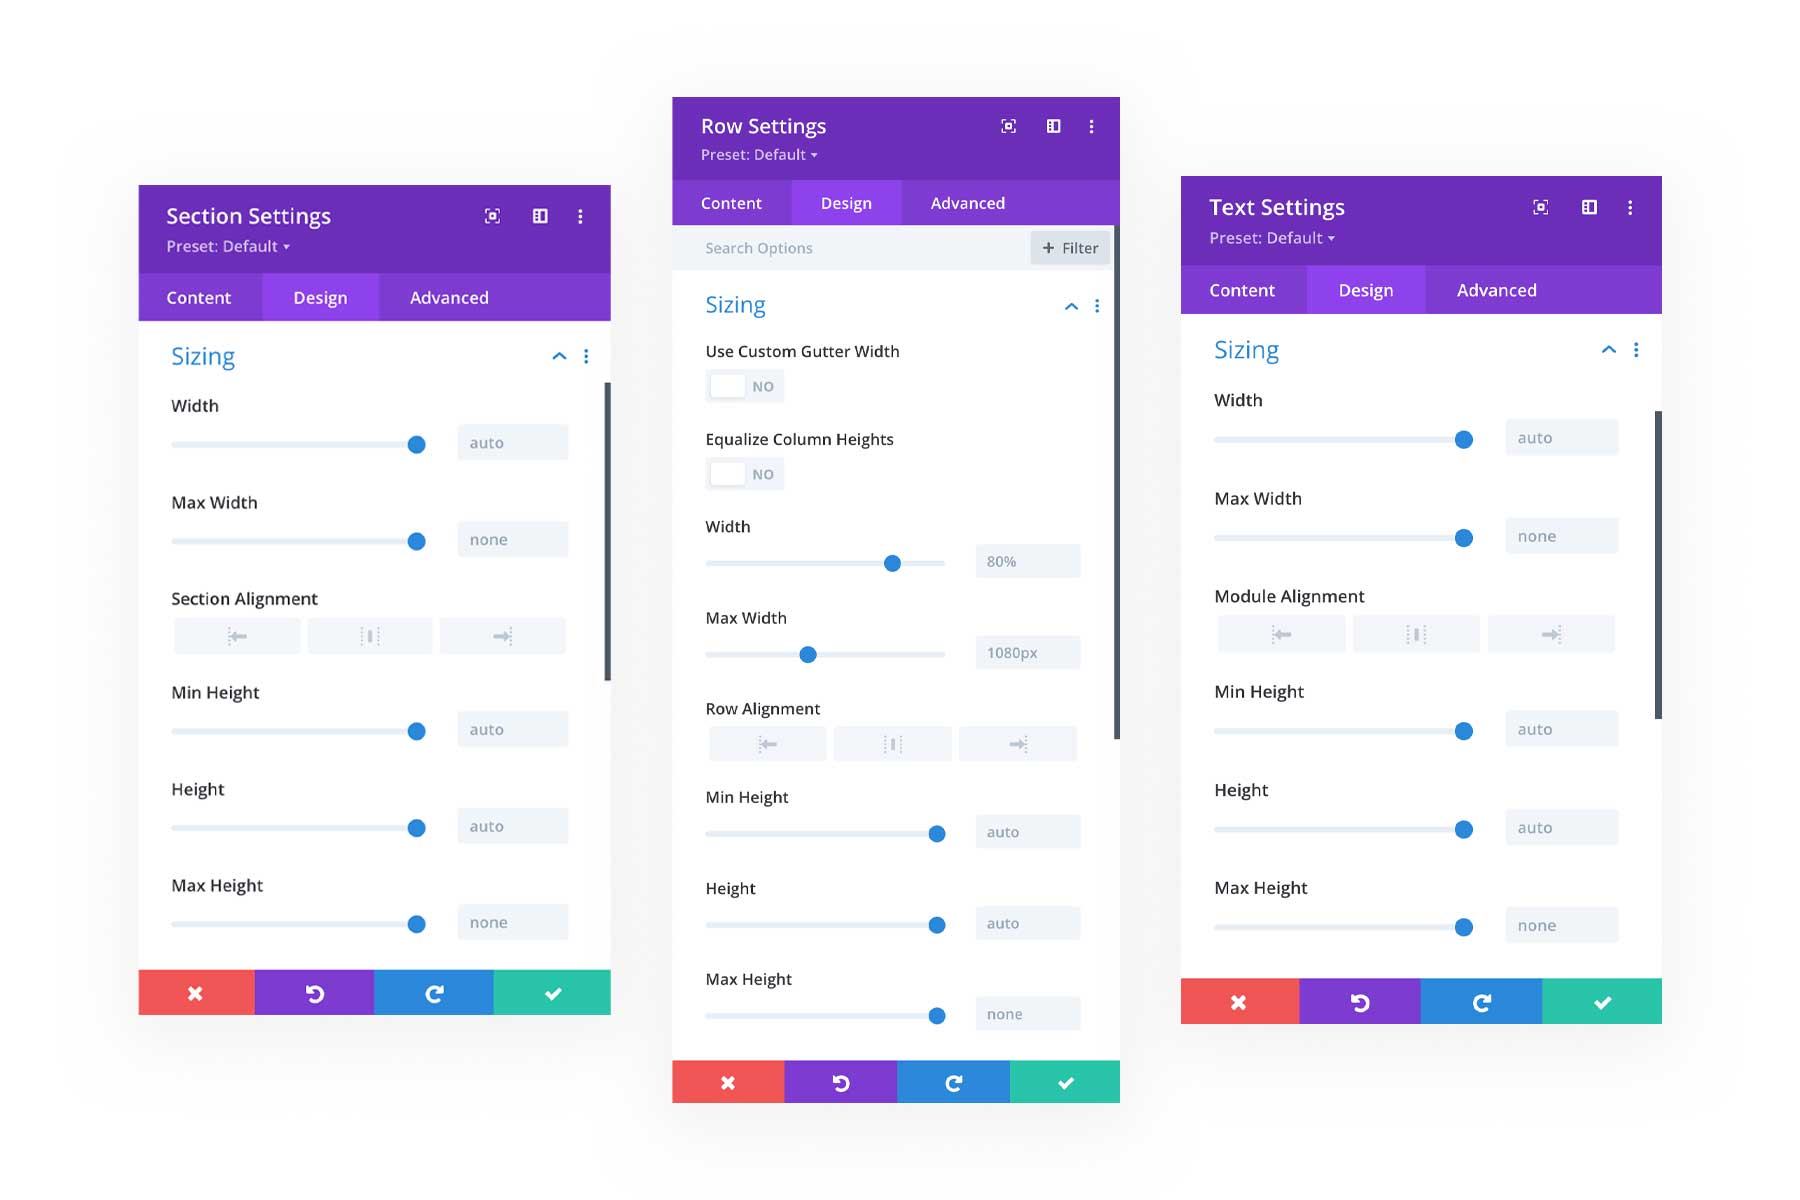 Where to find Divi Settings Options 